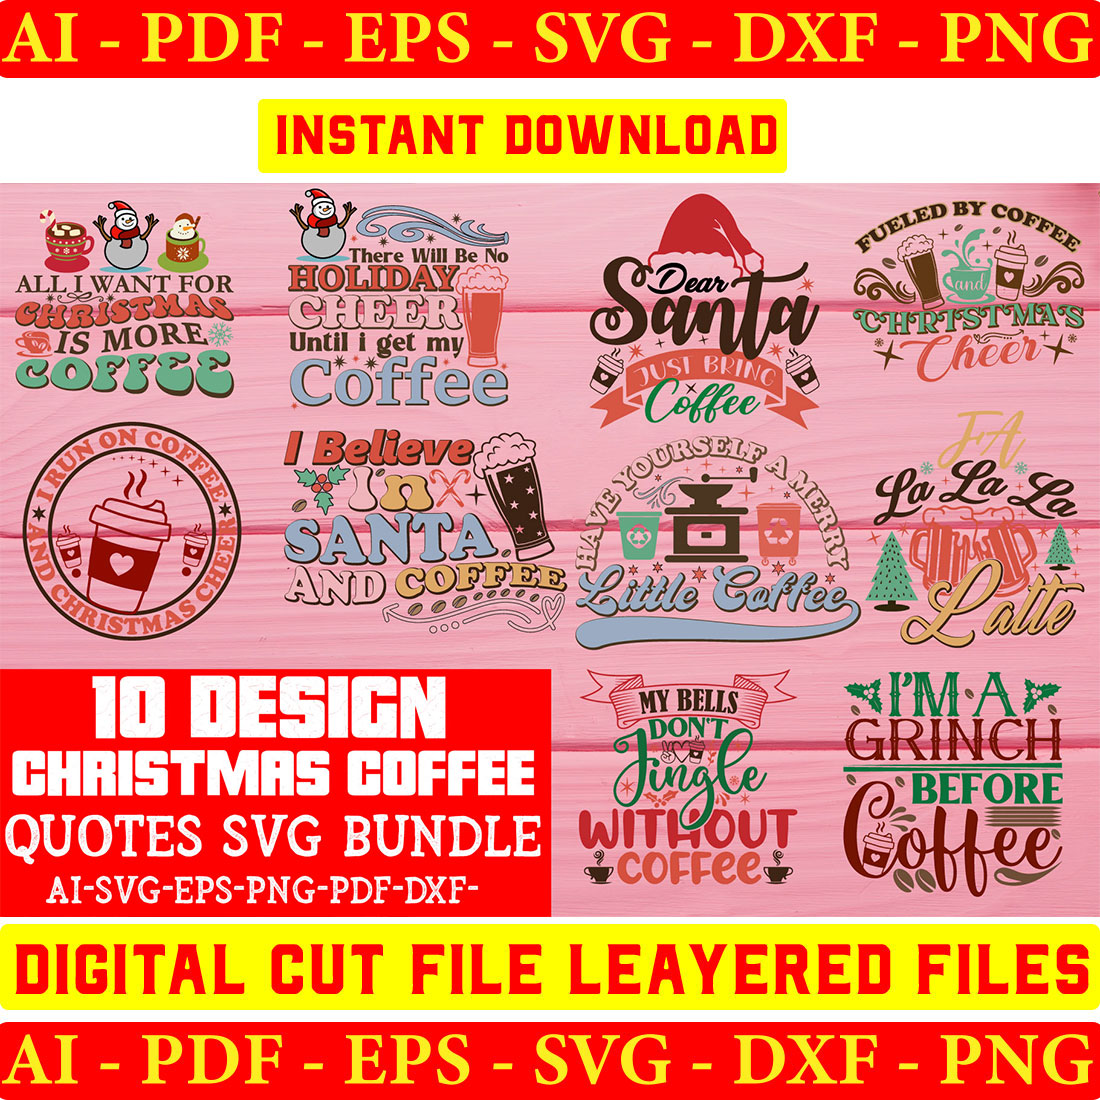 Christmas Coffee Quotes SVG Bundle cover image.